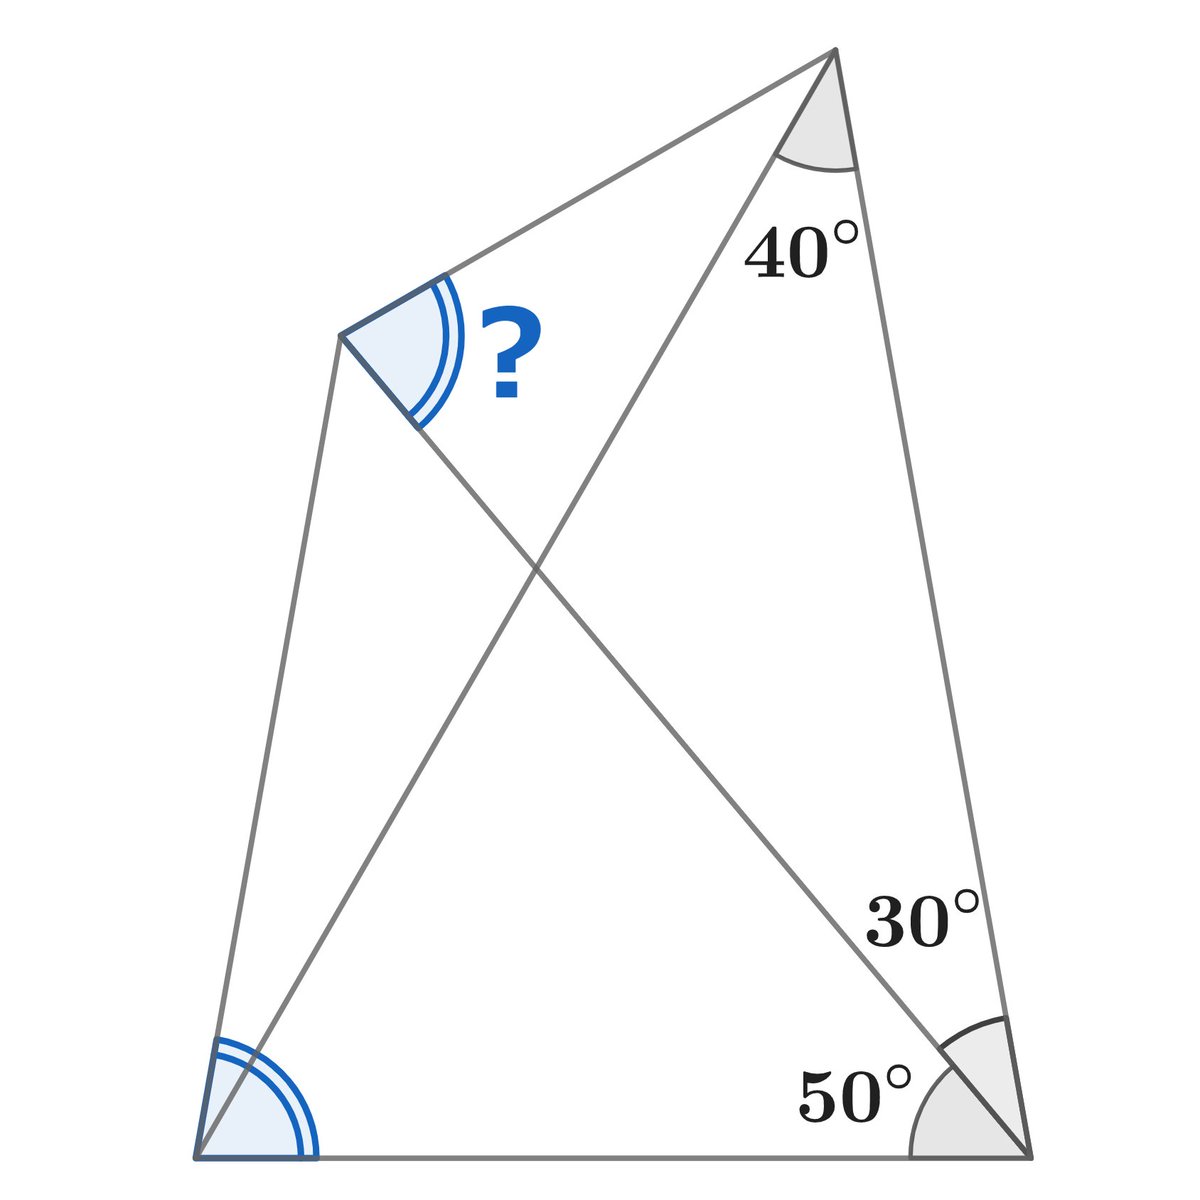 Math puzzle: Find the measure of the two equal angles marked in this diagram